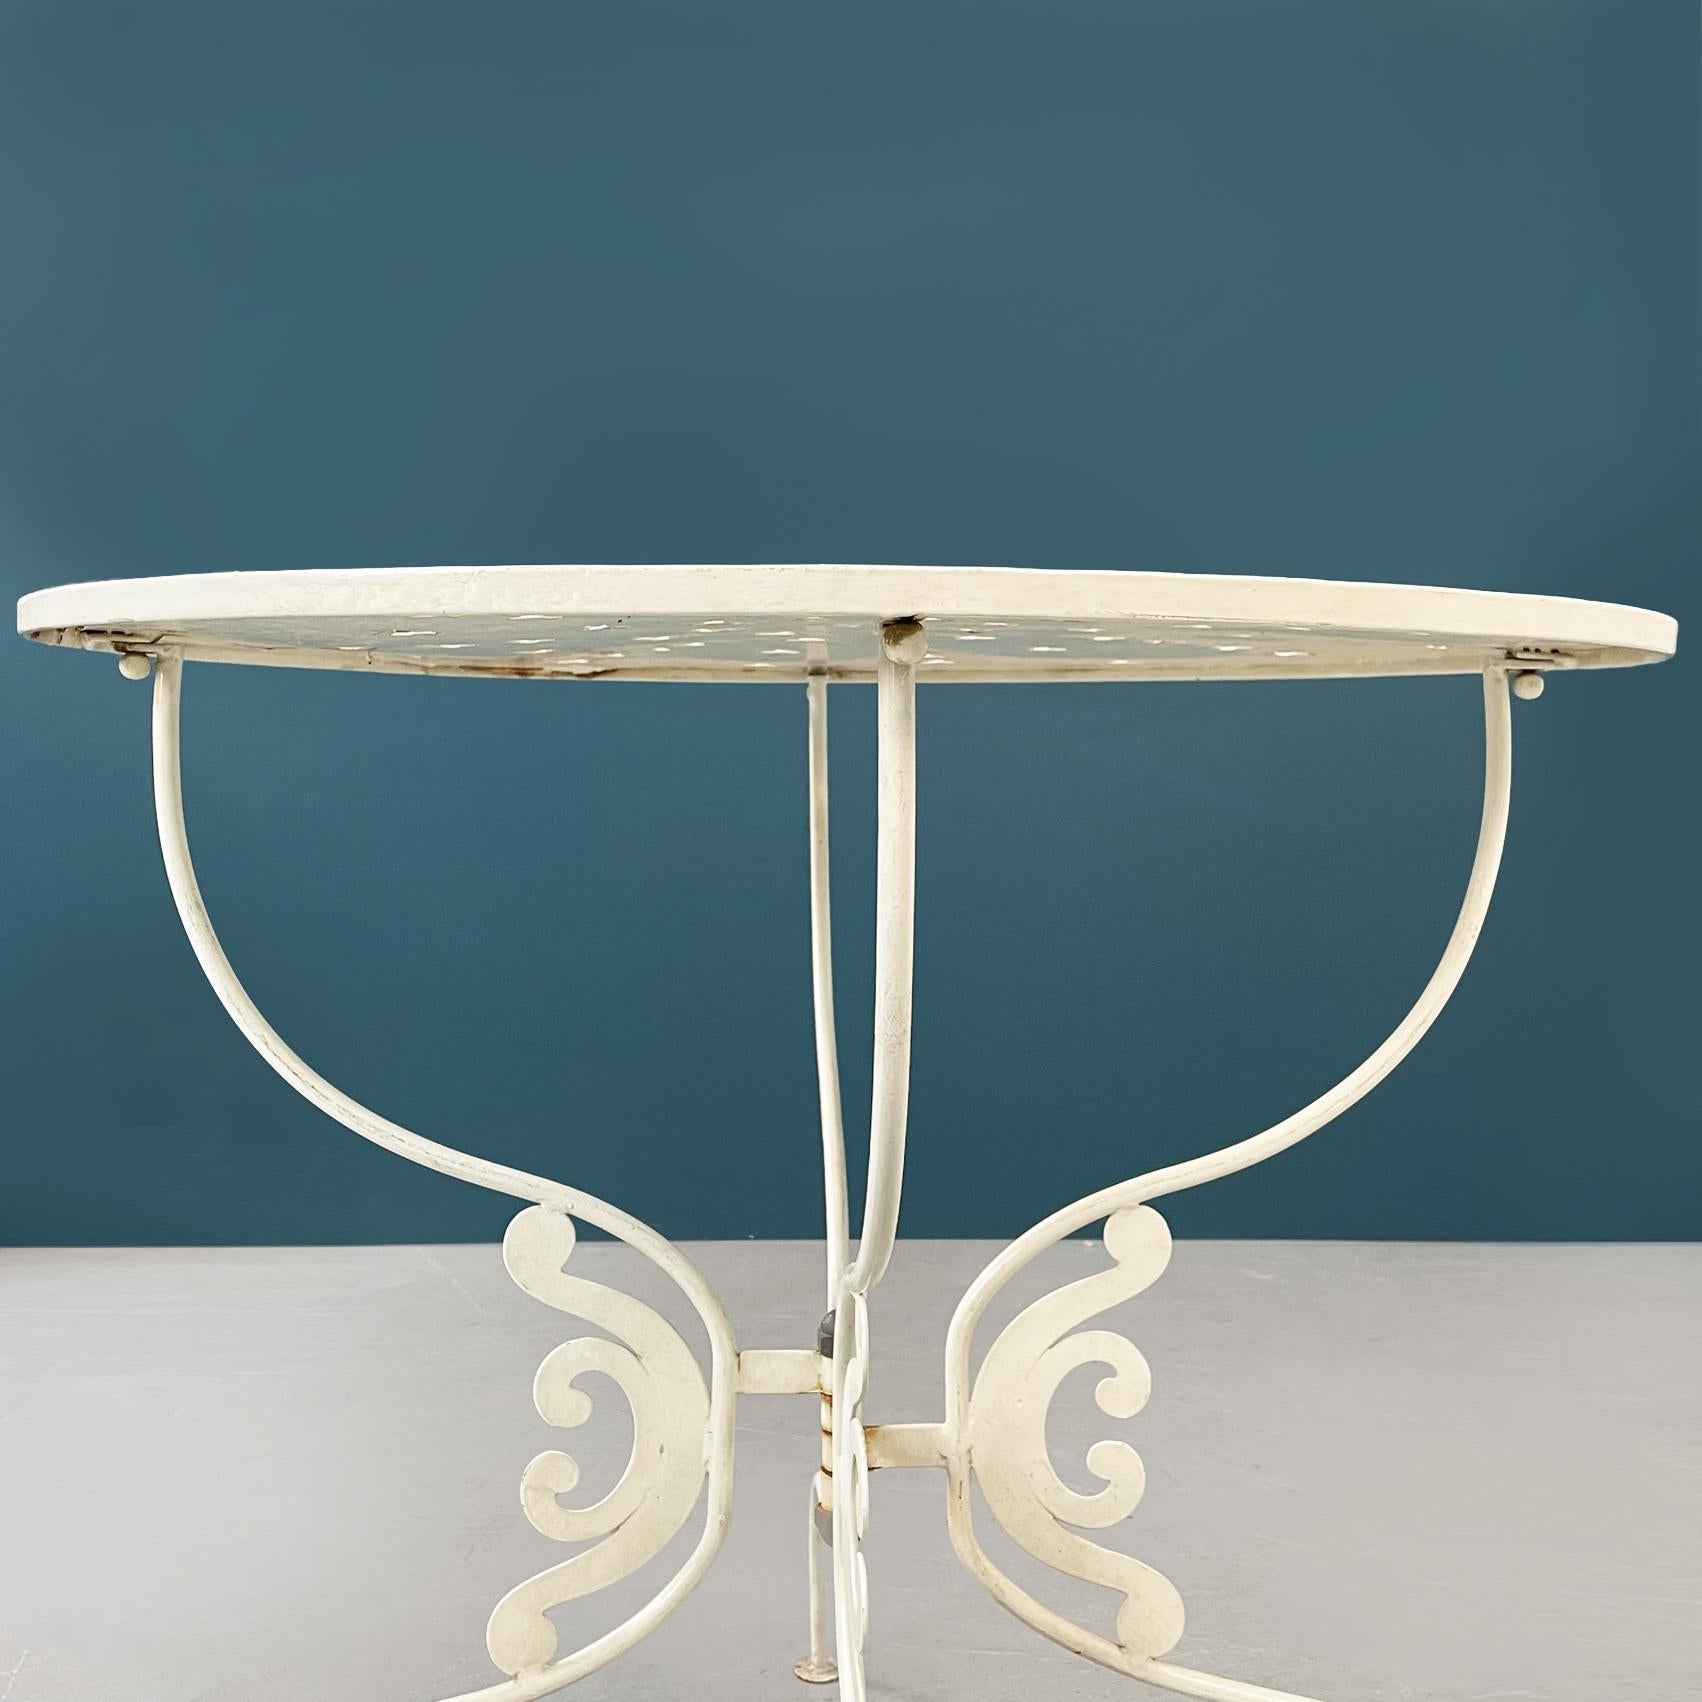 Italian Mid-Century Garden Table in White Wrought Iron Finely Worked, 1960s For Sale 2